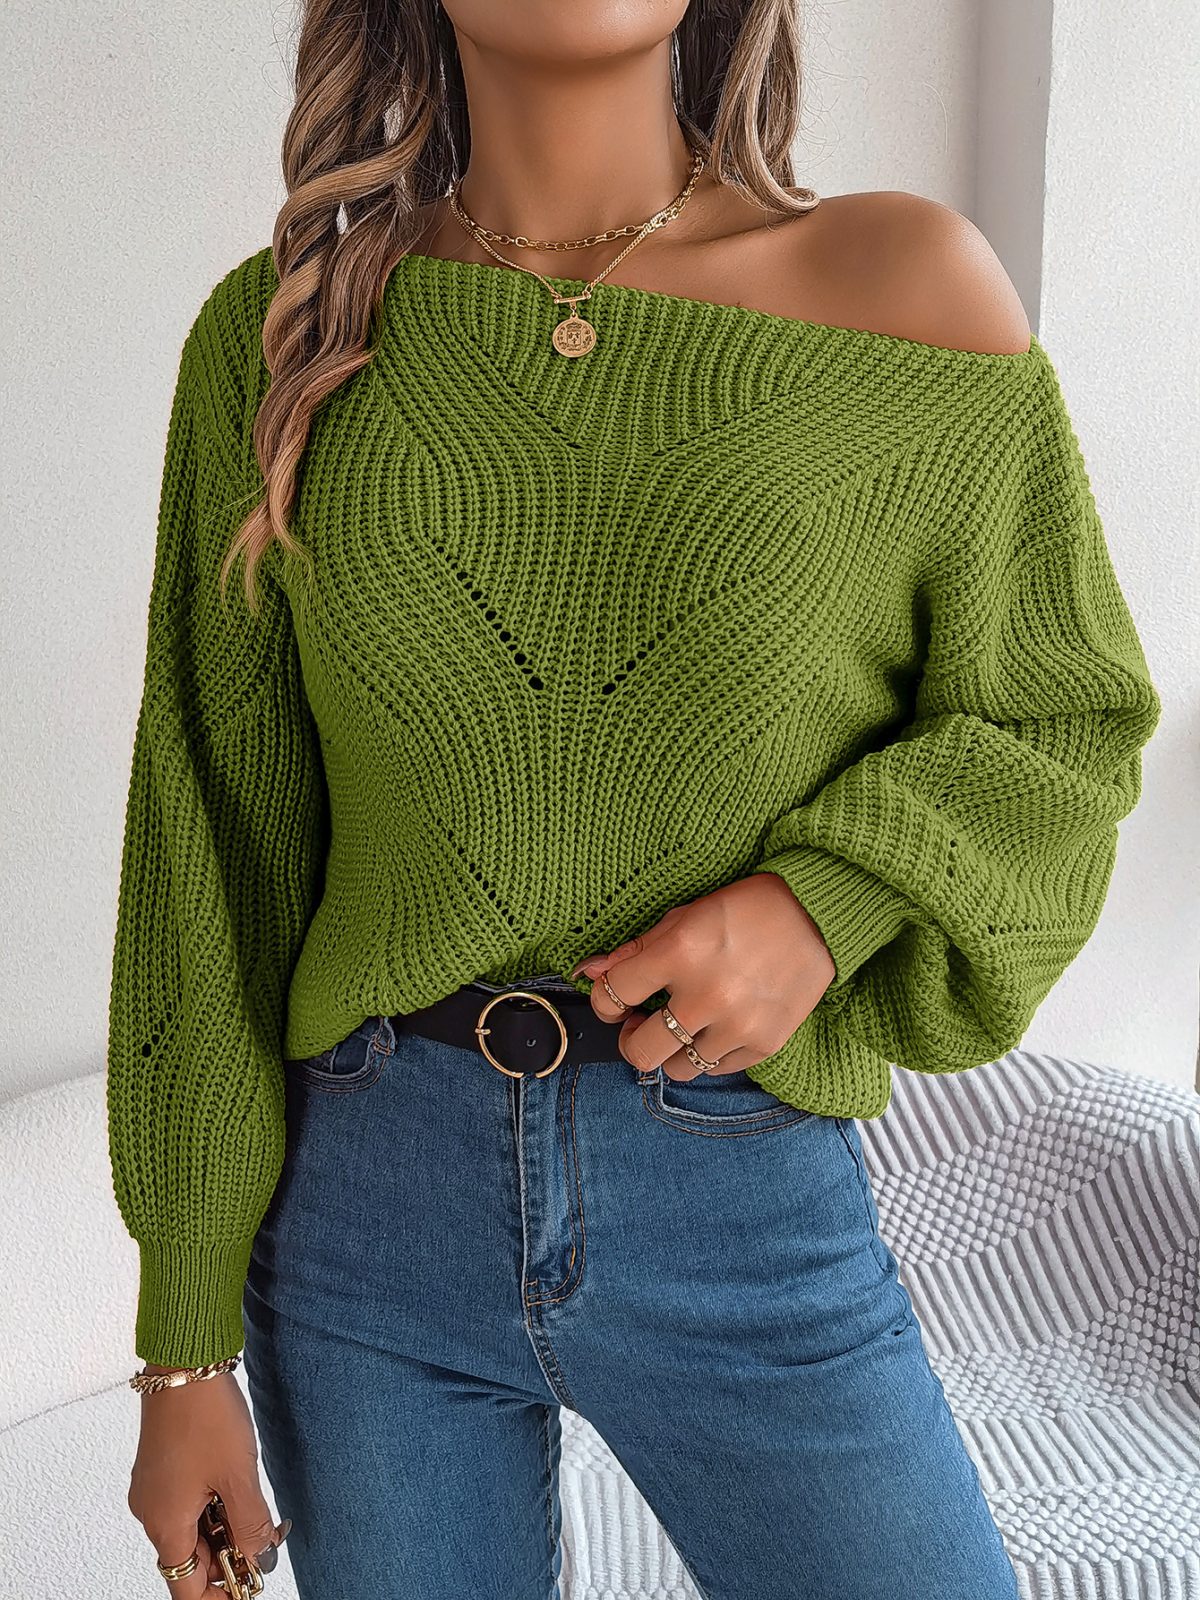 Hollow Out Cutout out off Neck off the Shoulder Lantern Sleeve Sweater in Sweaters